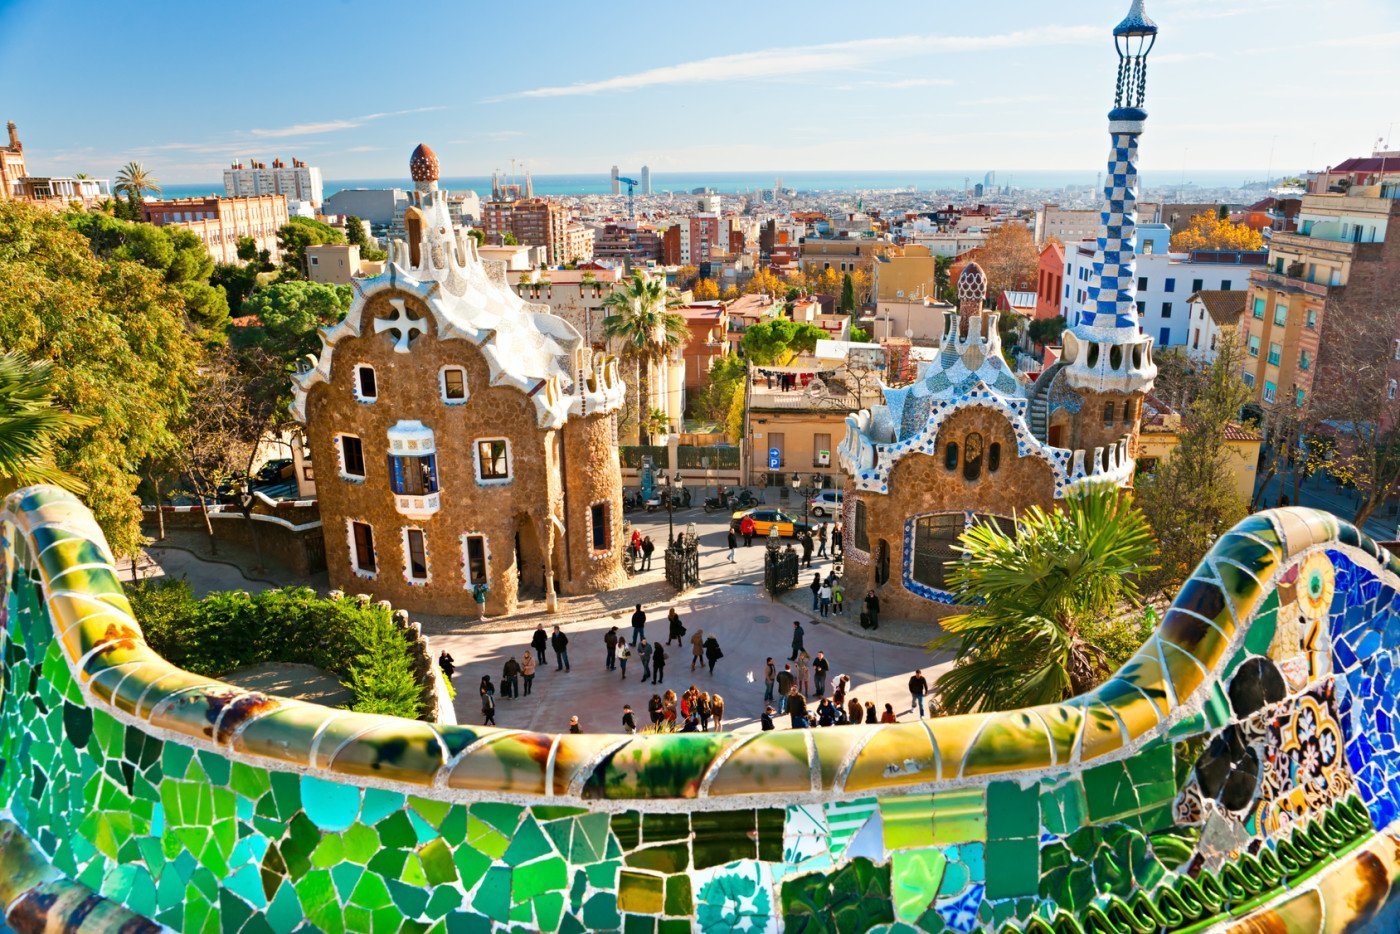 Park Guell in Barcelona, Spain. Photo by urbantimes.co